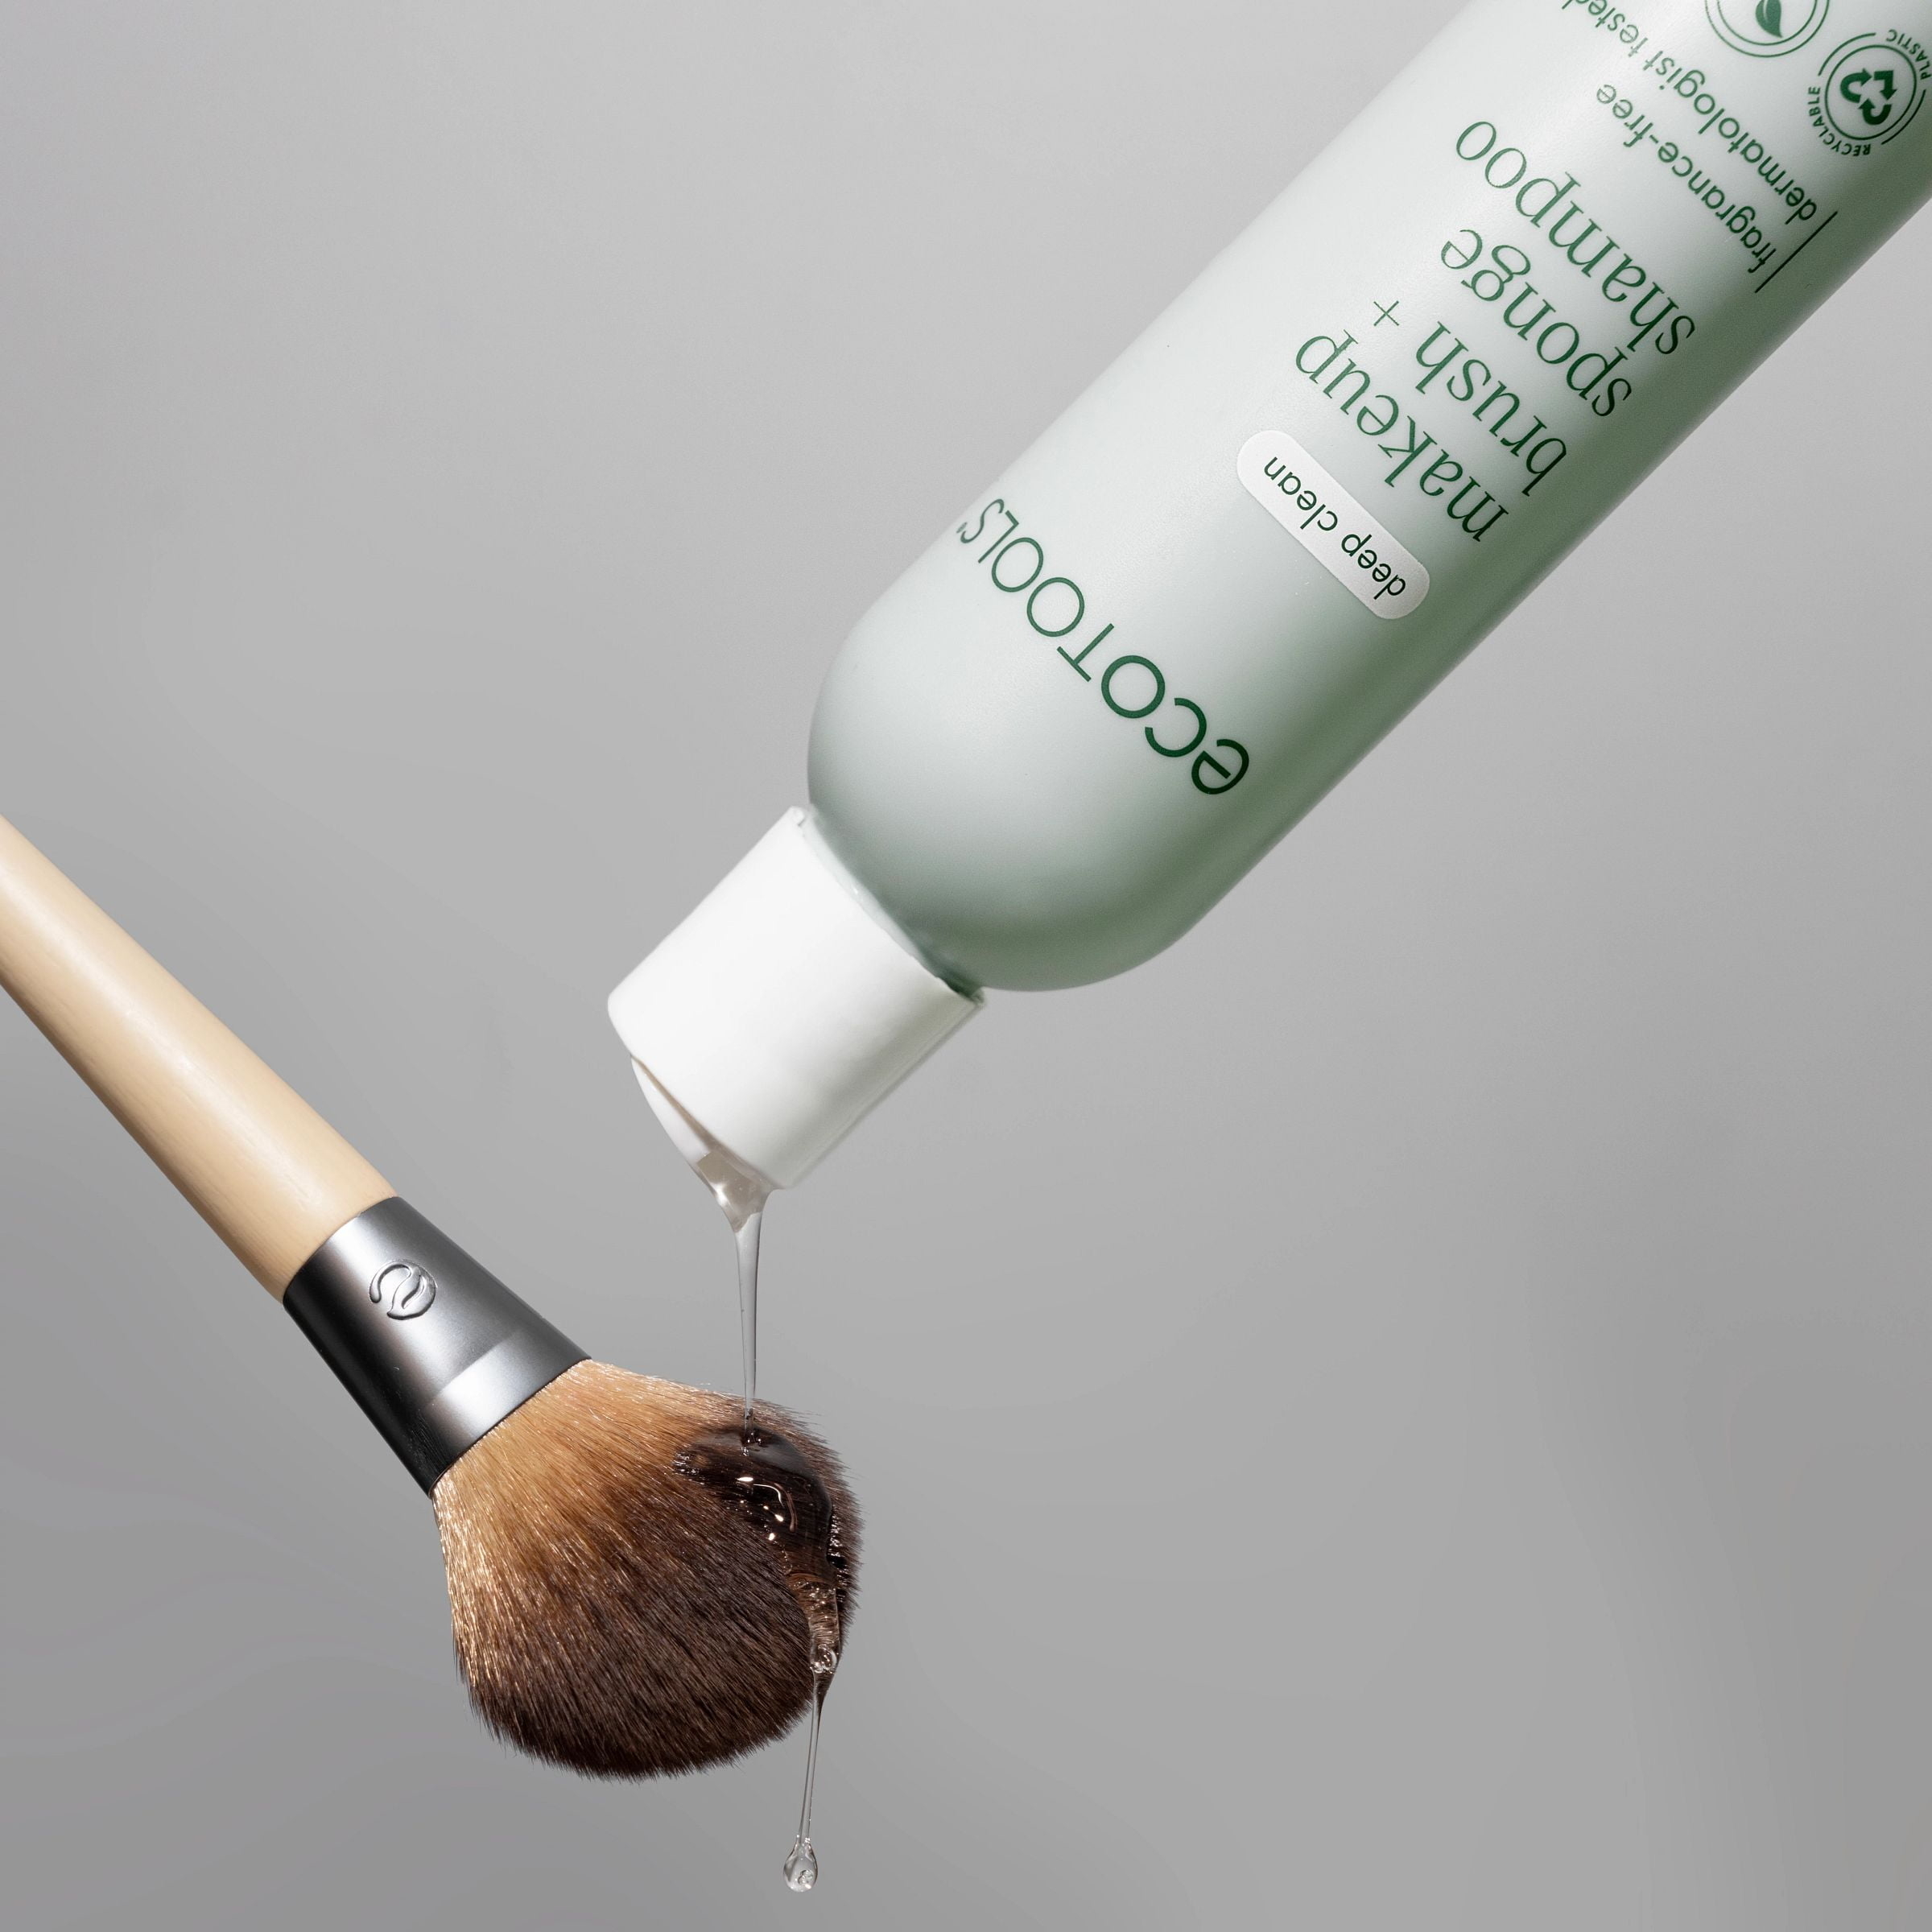 the makeup brush solution being used on a makeup brush